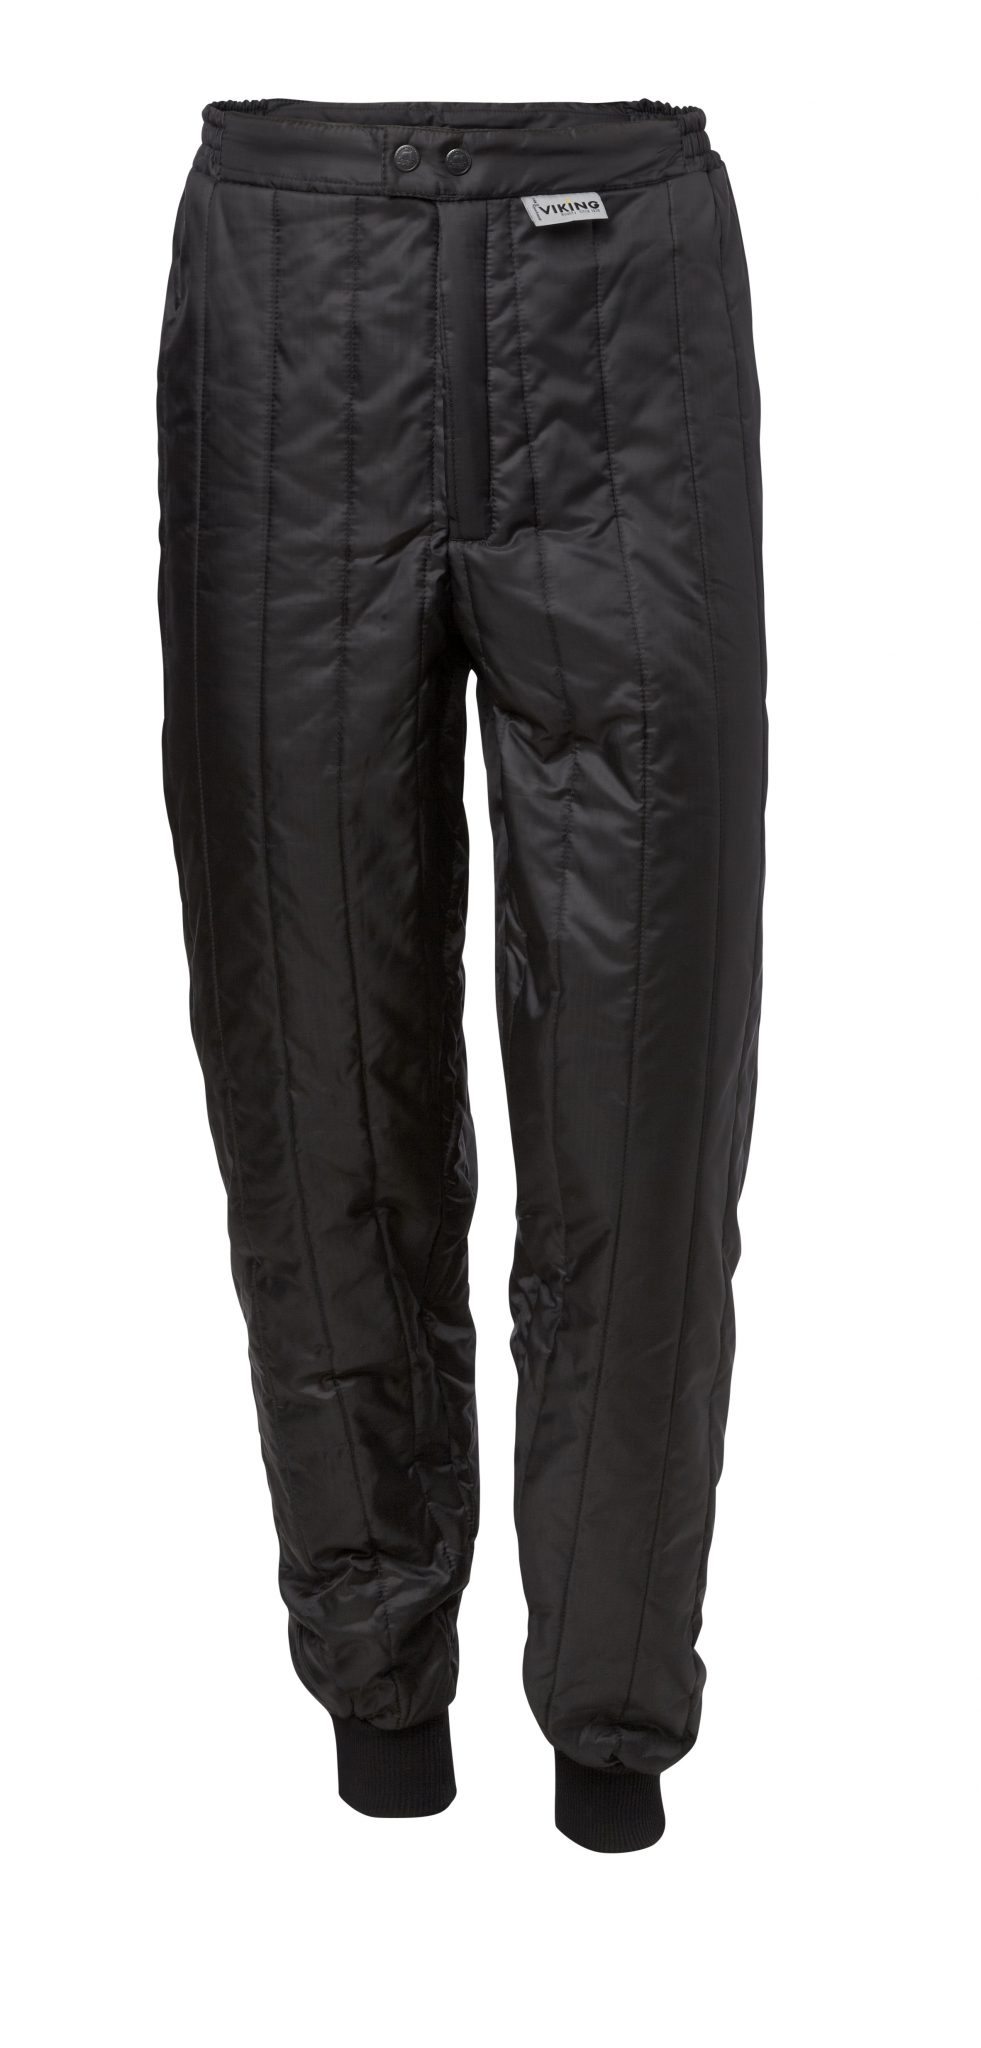 Men's skialp active thermal trousers RESWOR for only 48.9 € | NORTHFINDER